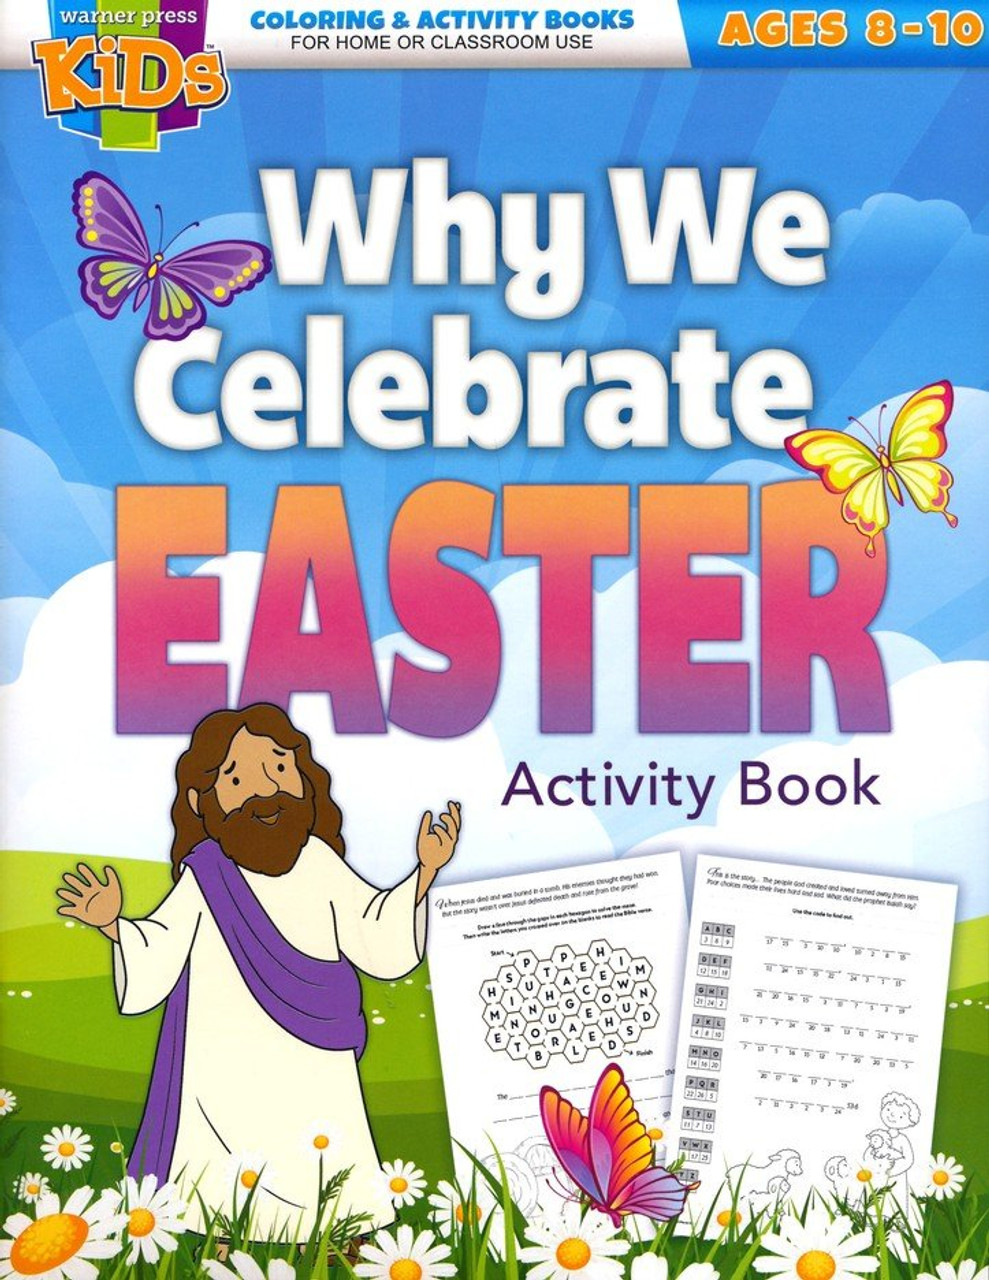 Why We Celebrate Easter - Coloring & Activity Book